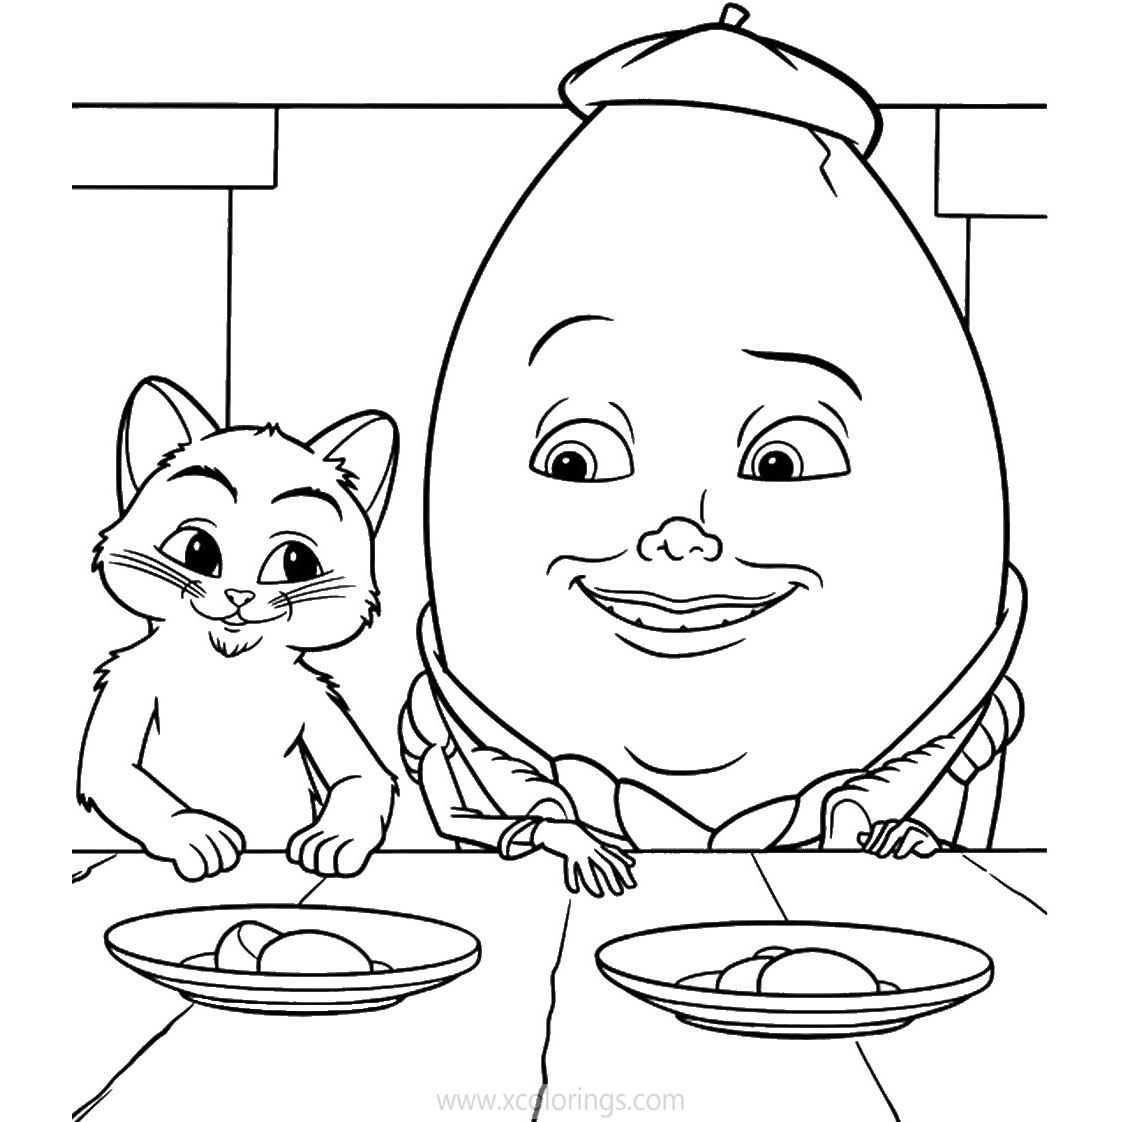 Free Puss in Boots Coloring Pages Having Food with Humpty Dumpty printable